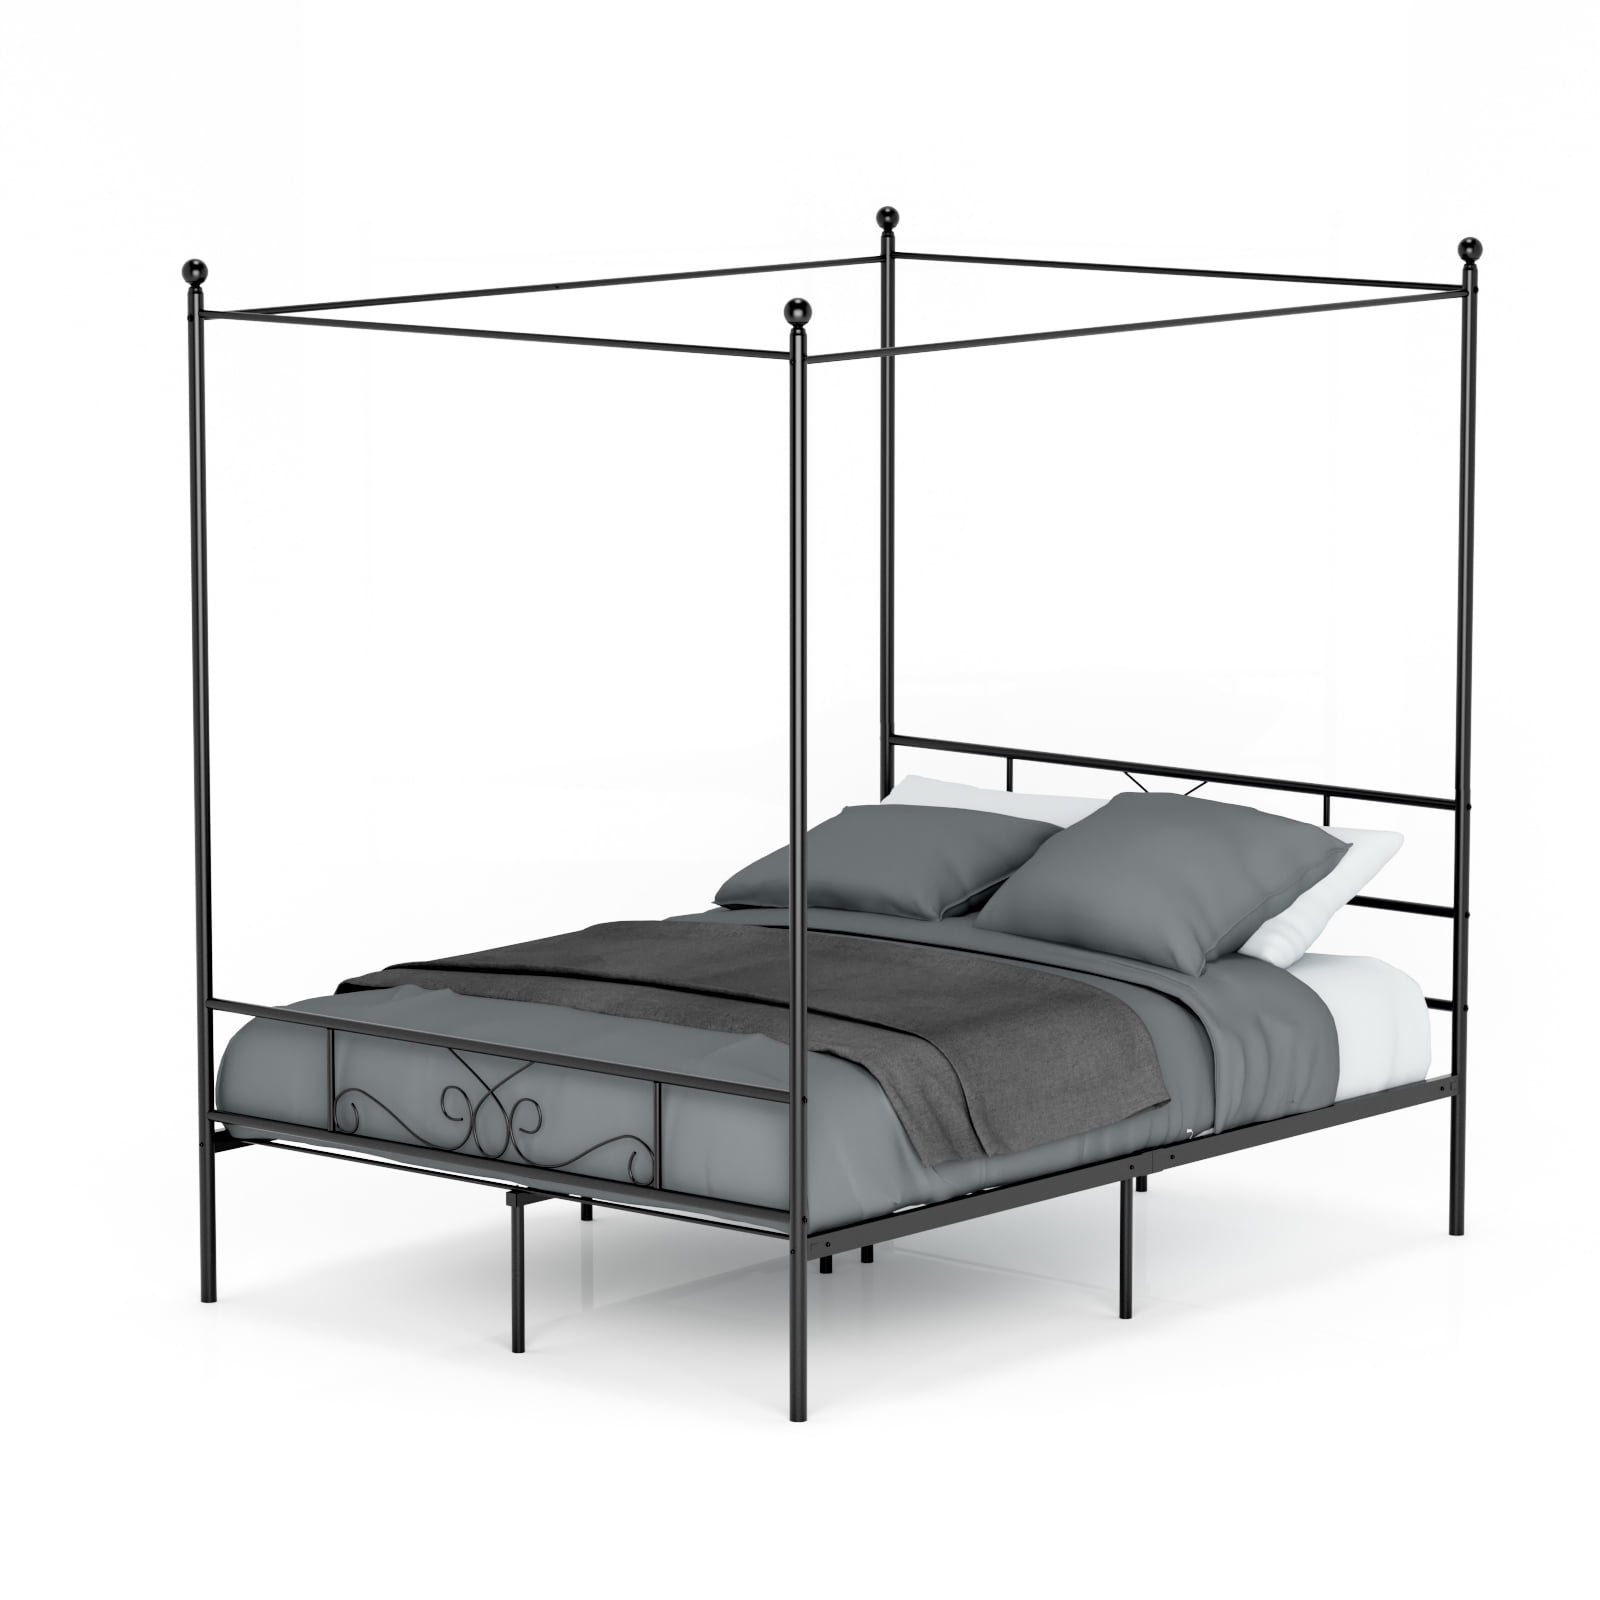 Queen Canopy Bed Frame 4 Poster Steel, White Queen 4 Poster Bed